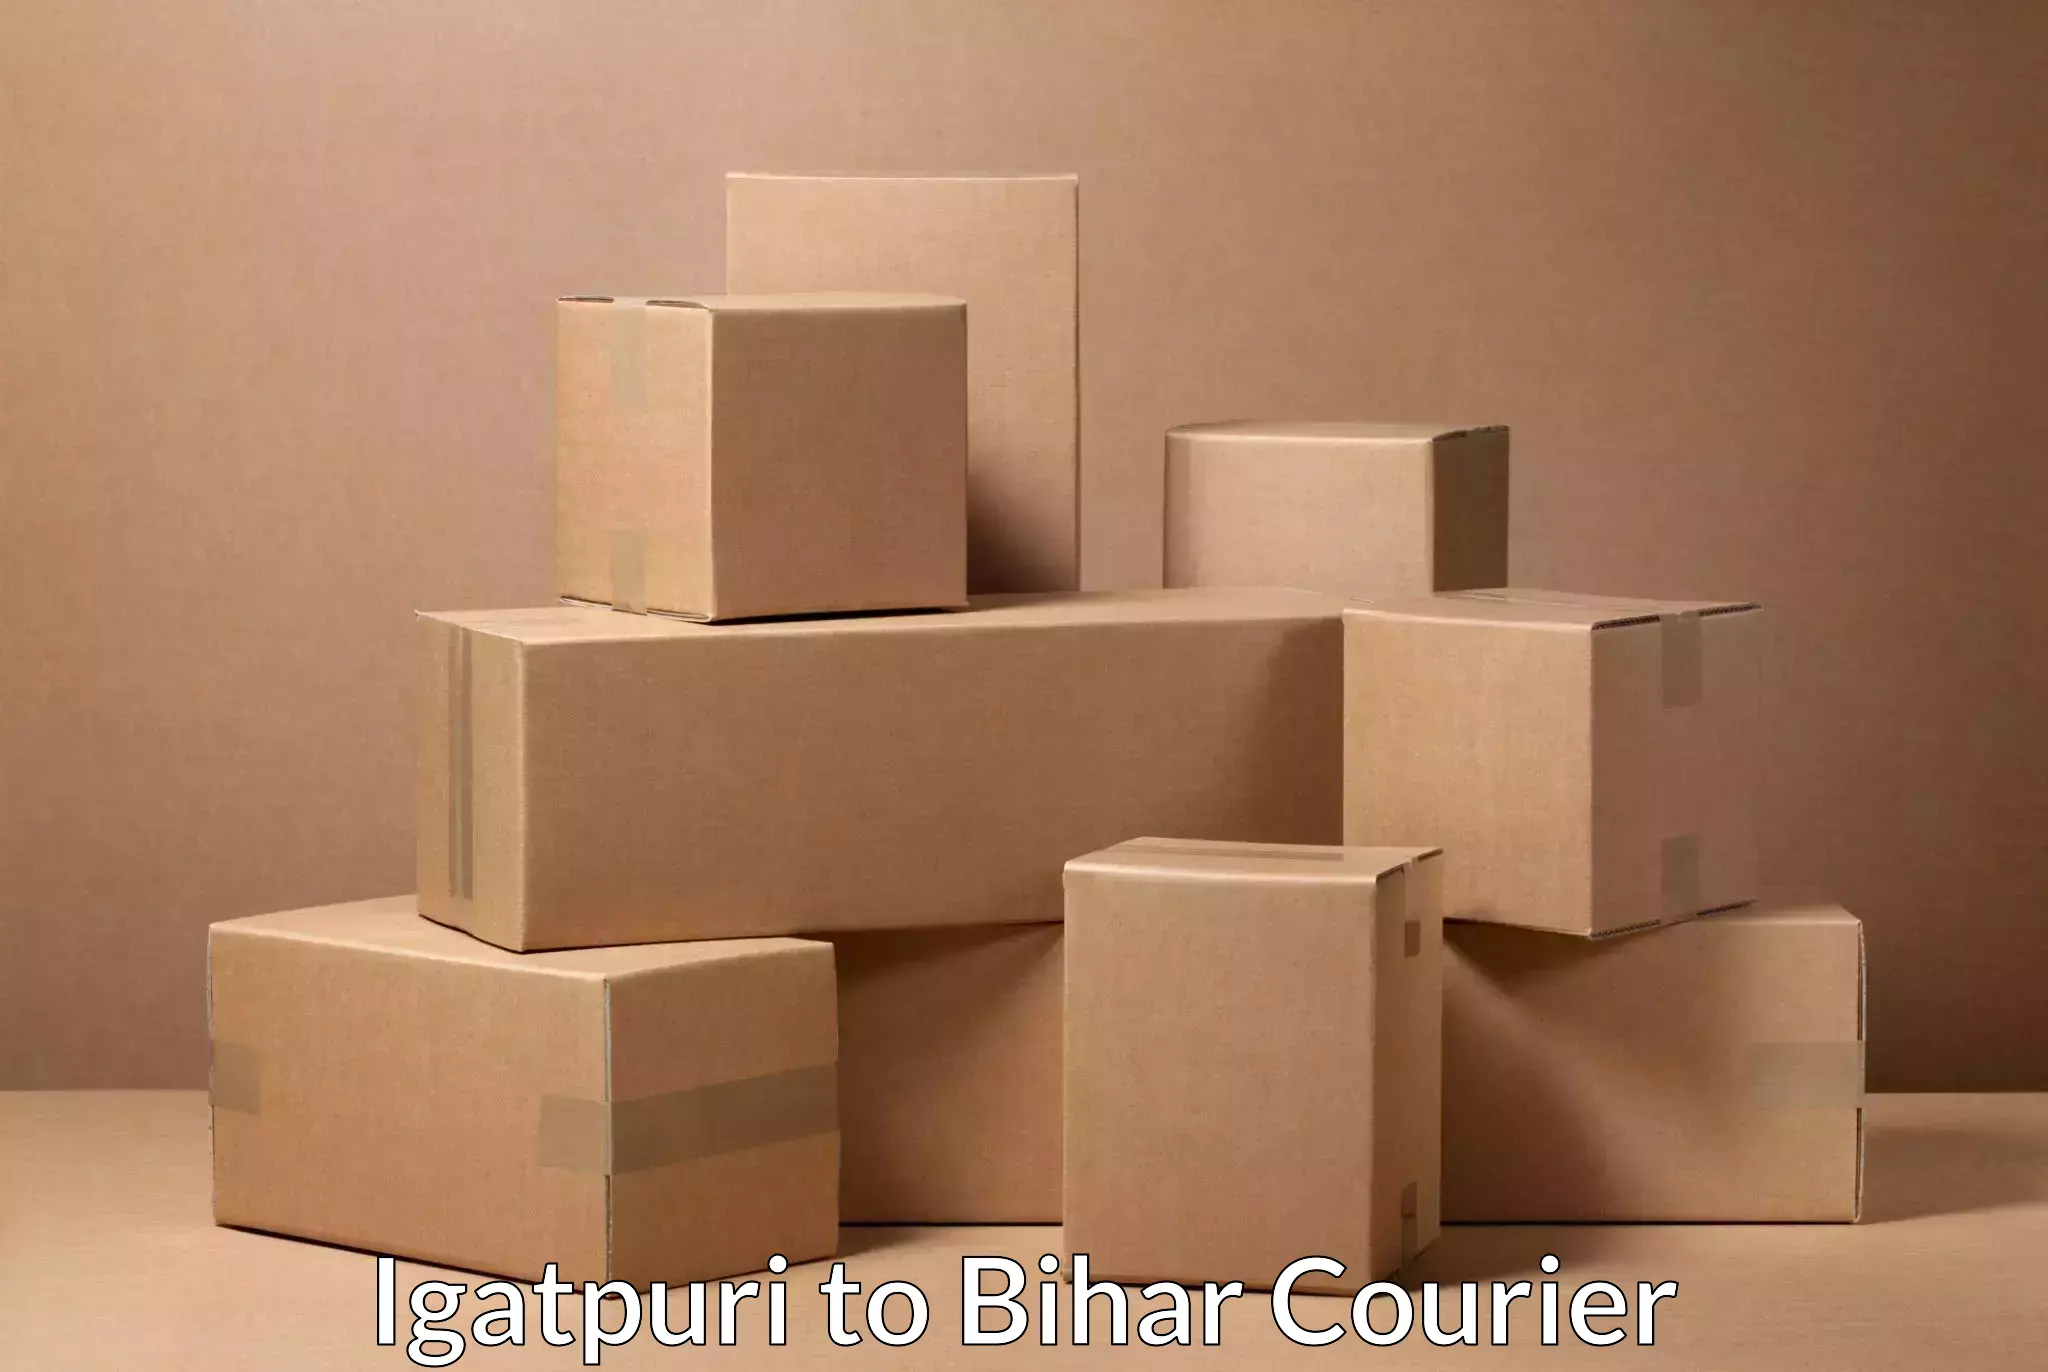 Multi-service courier options Igatpuri to Dighwara